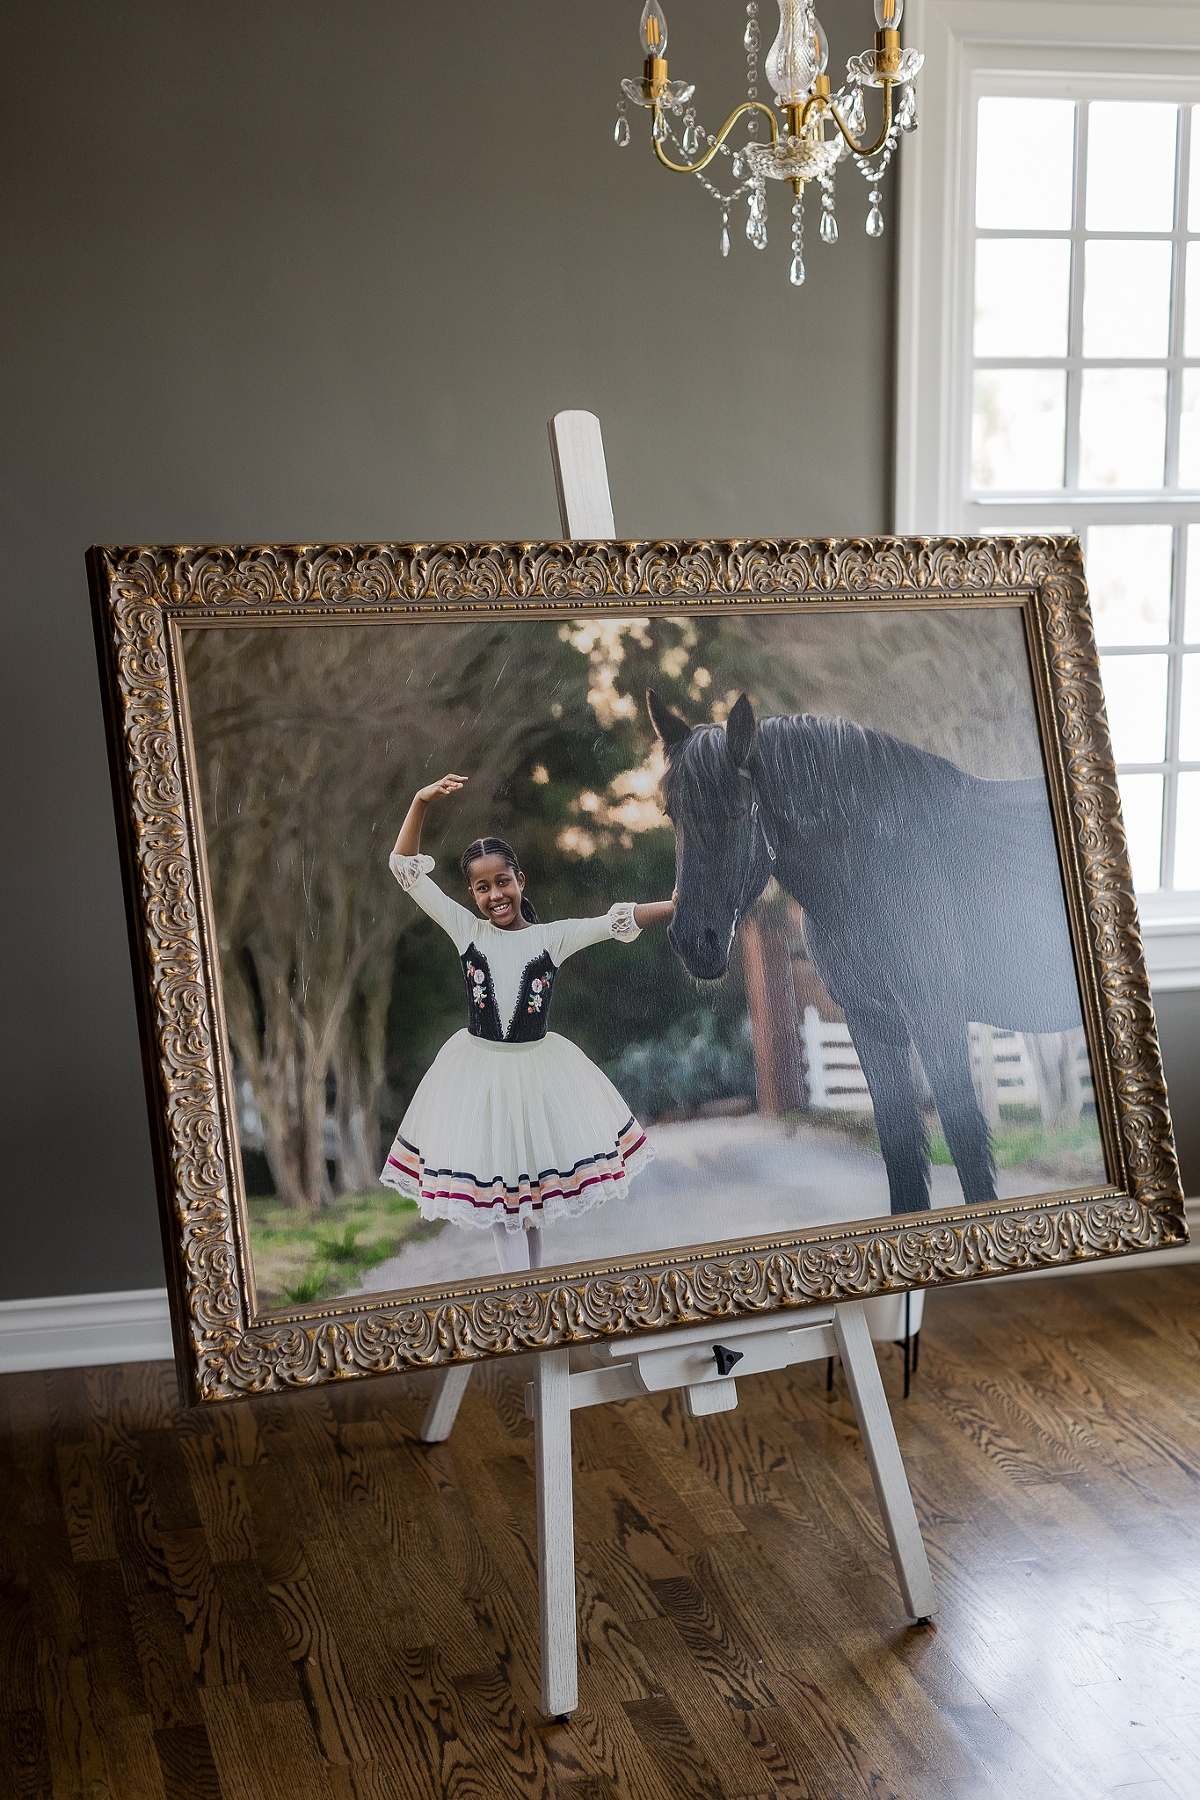 Girl smiling at a horse, both framed and displayed on an easel in a room with elegant decor.